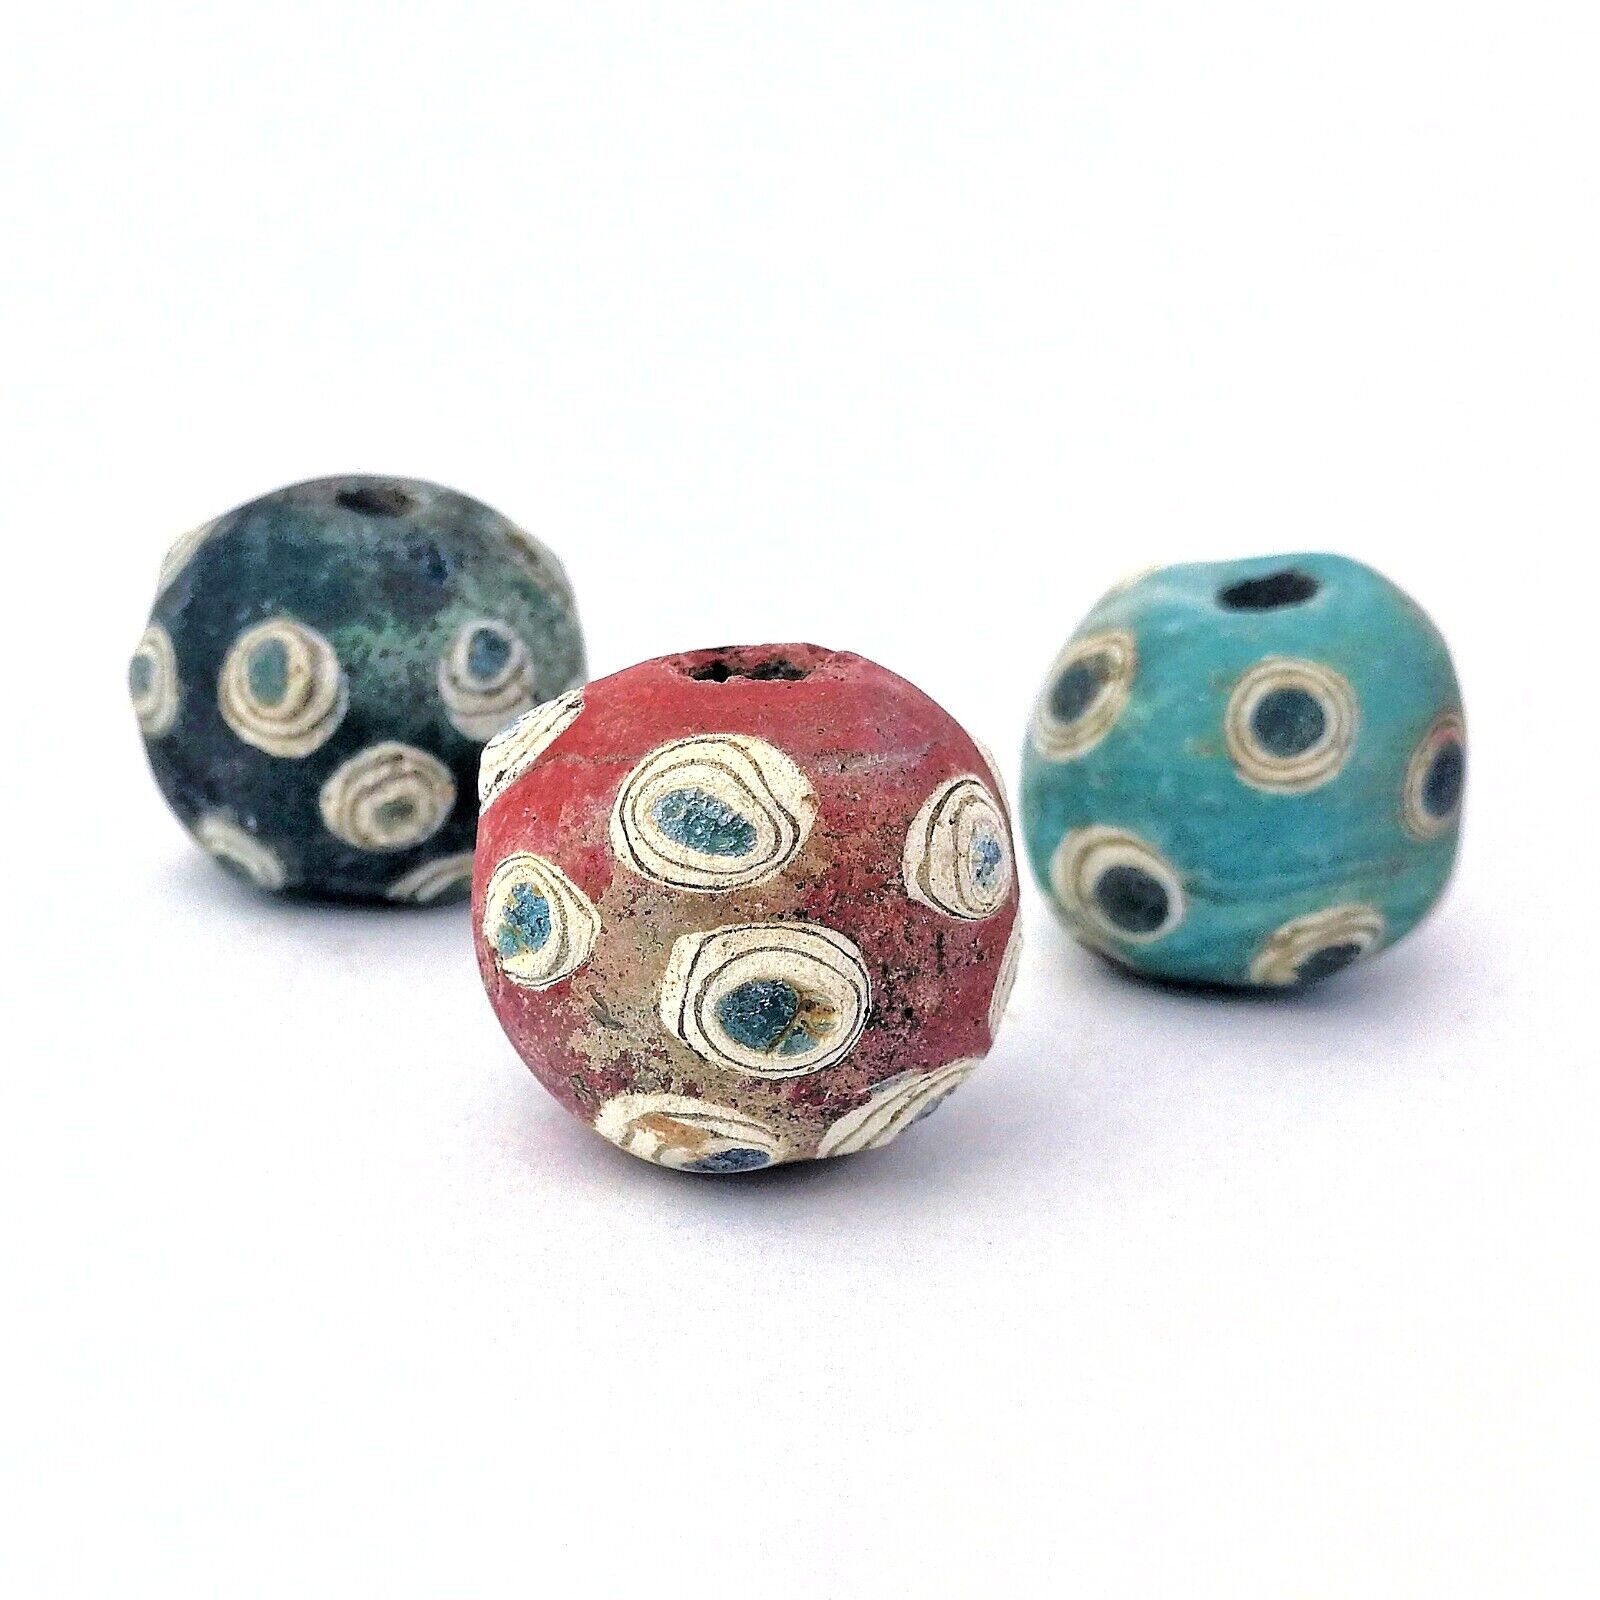 A warty cylindrical bead, 7 - 9 century